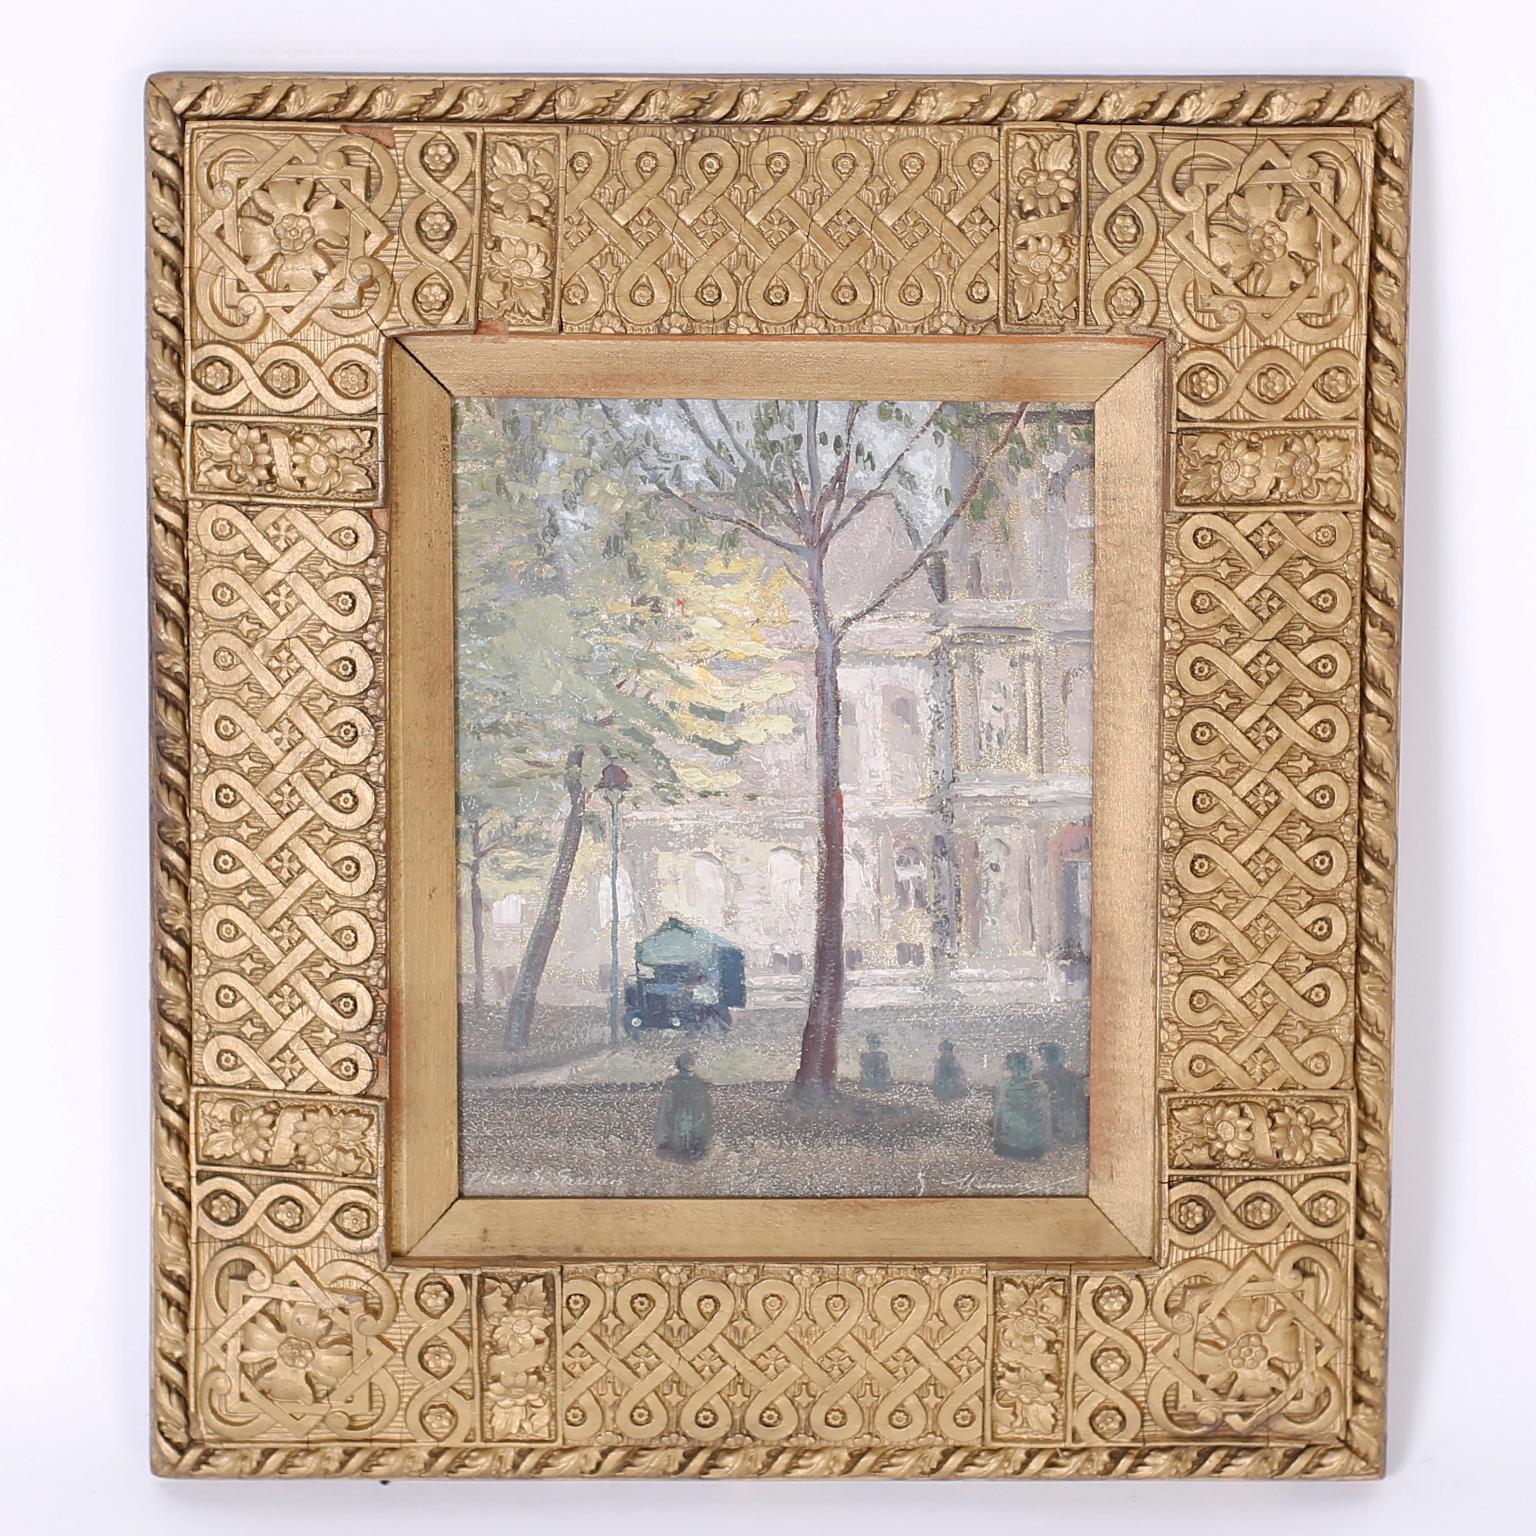 Impressionist oil painting on board of a Paris street scene with figures, trees, and architecture signed in the lower right Nimmo 53 and presented in an antique carved wood frame.

Actual painting is 10